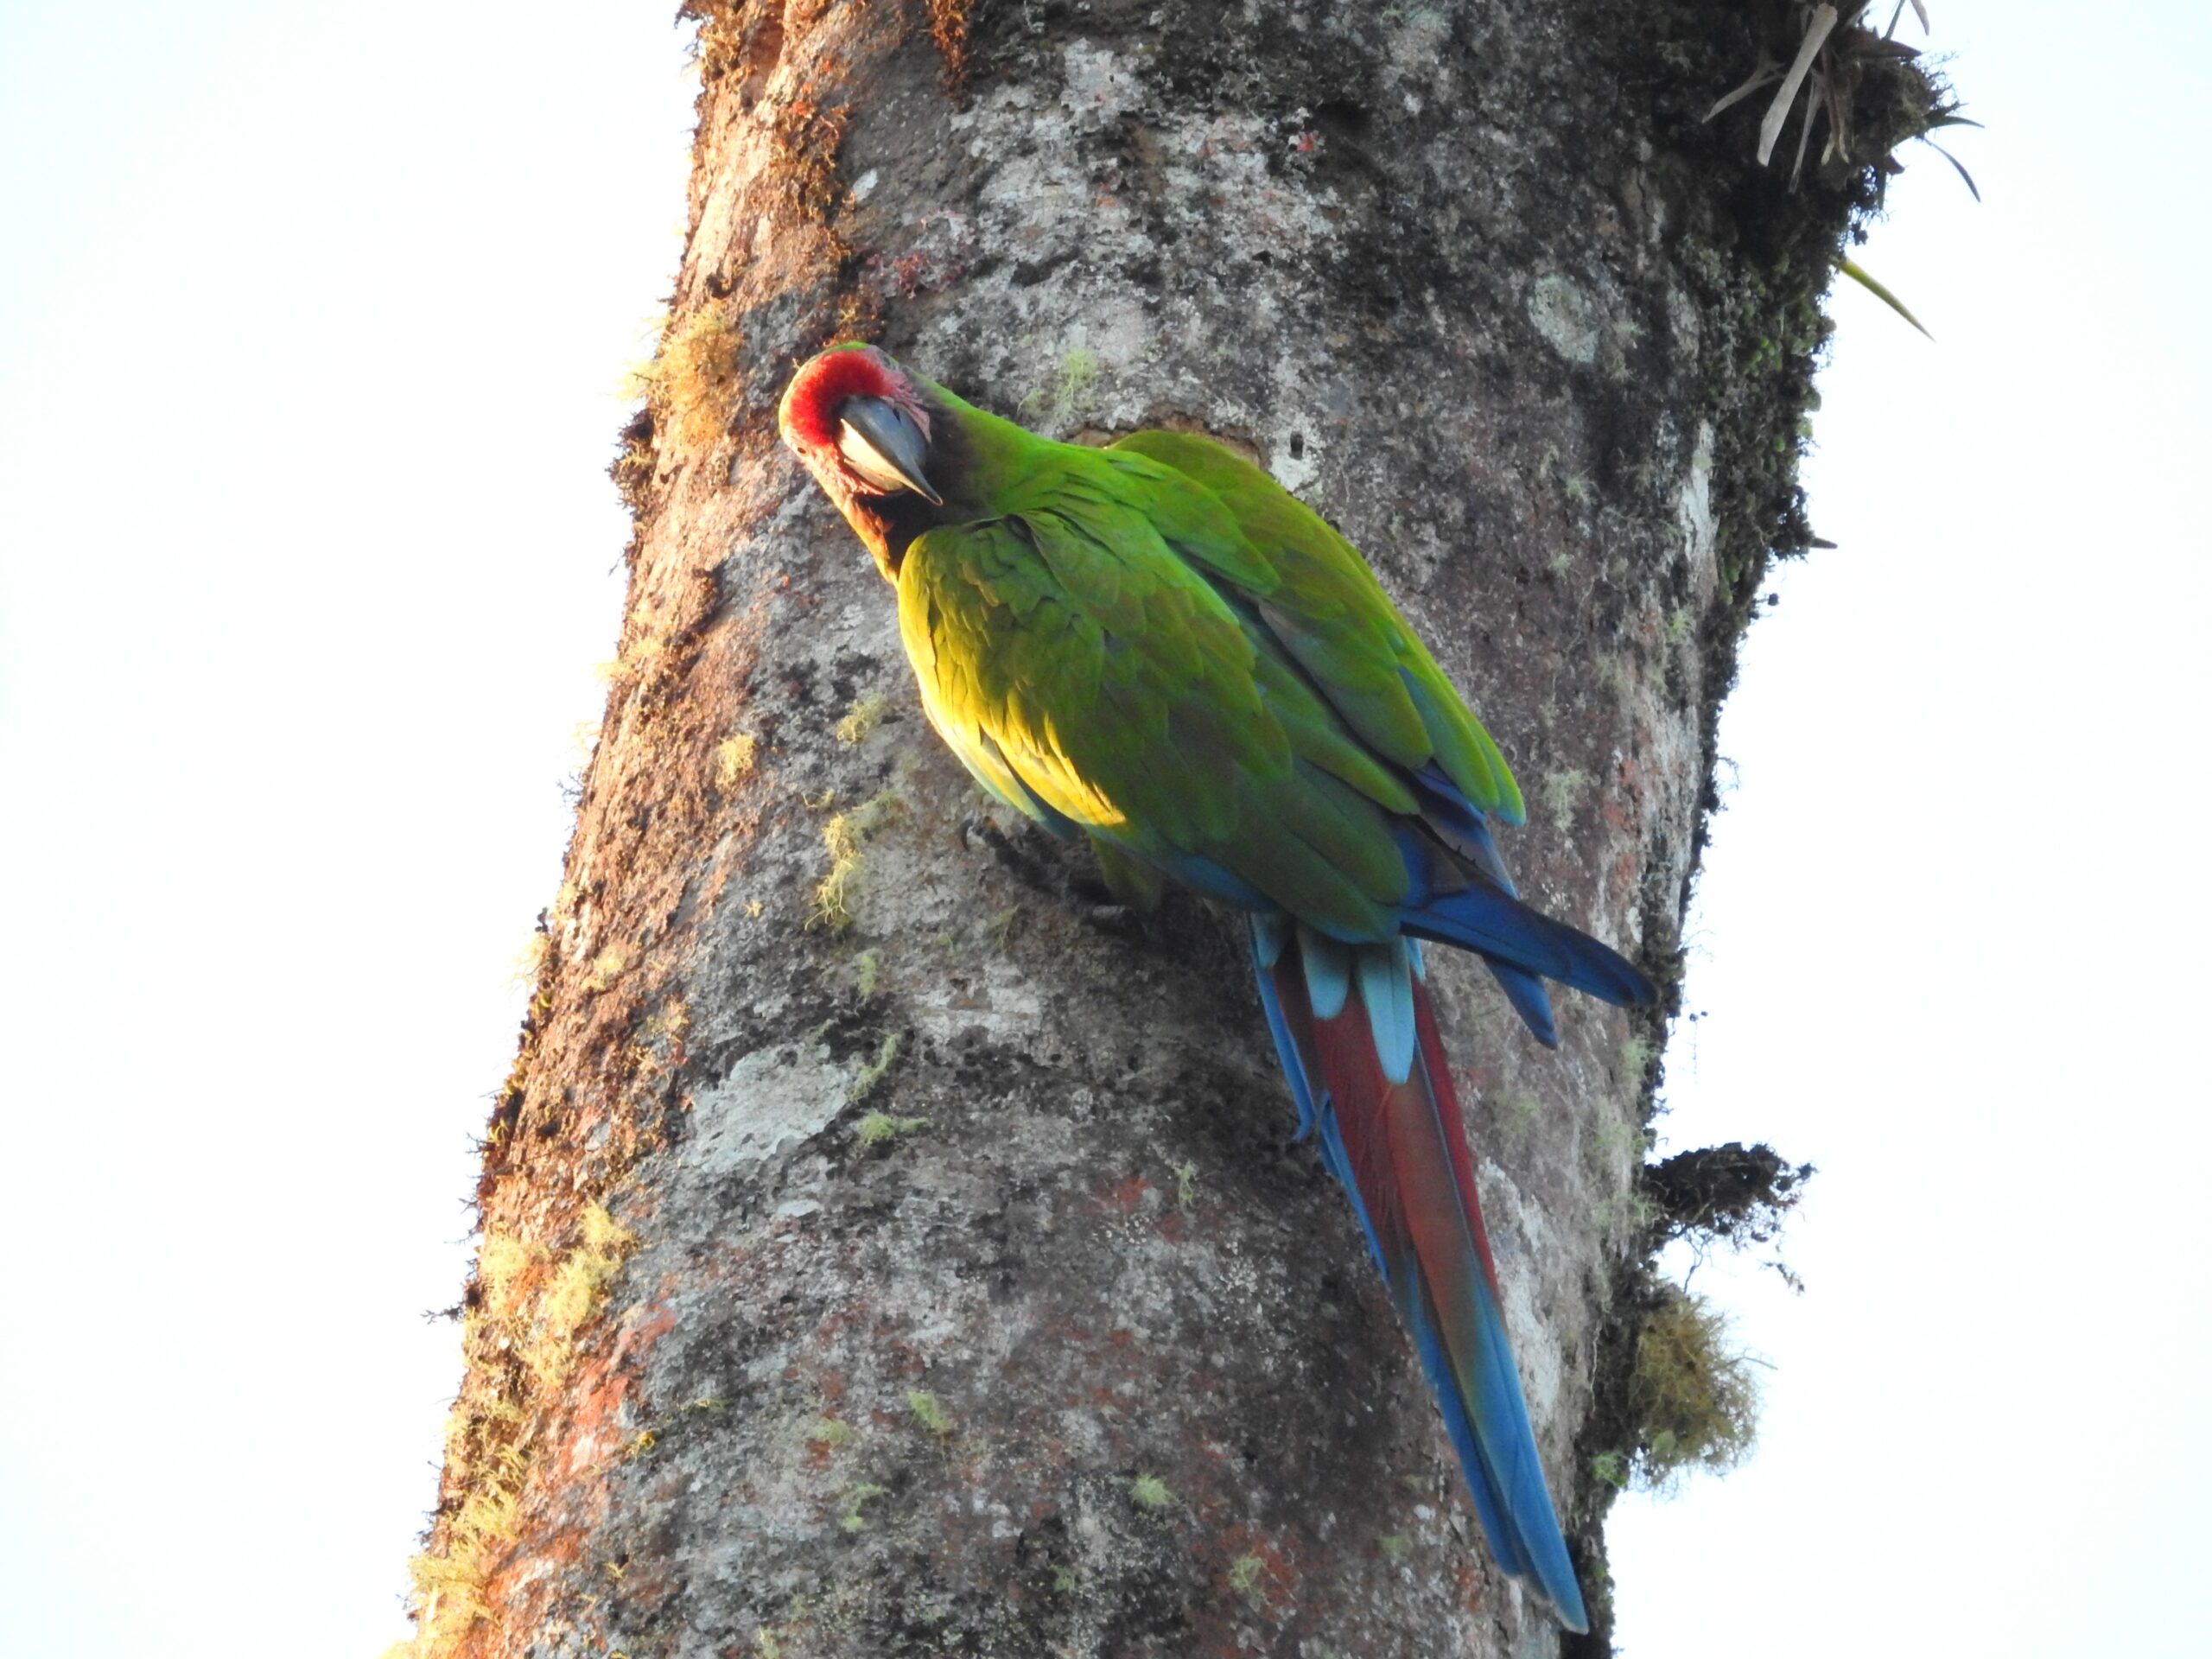 A military macaw in the Narupa reserve